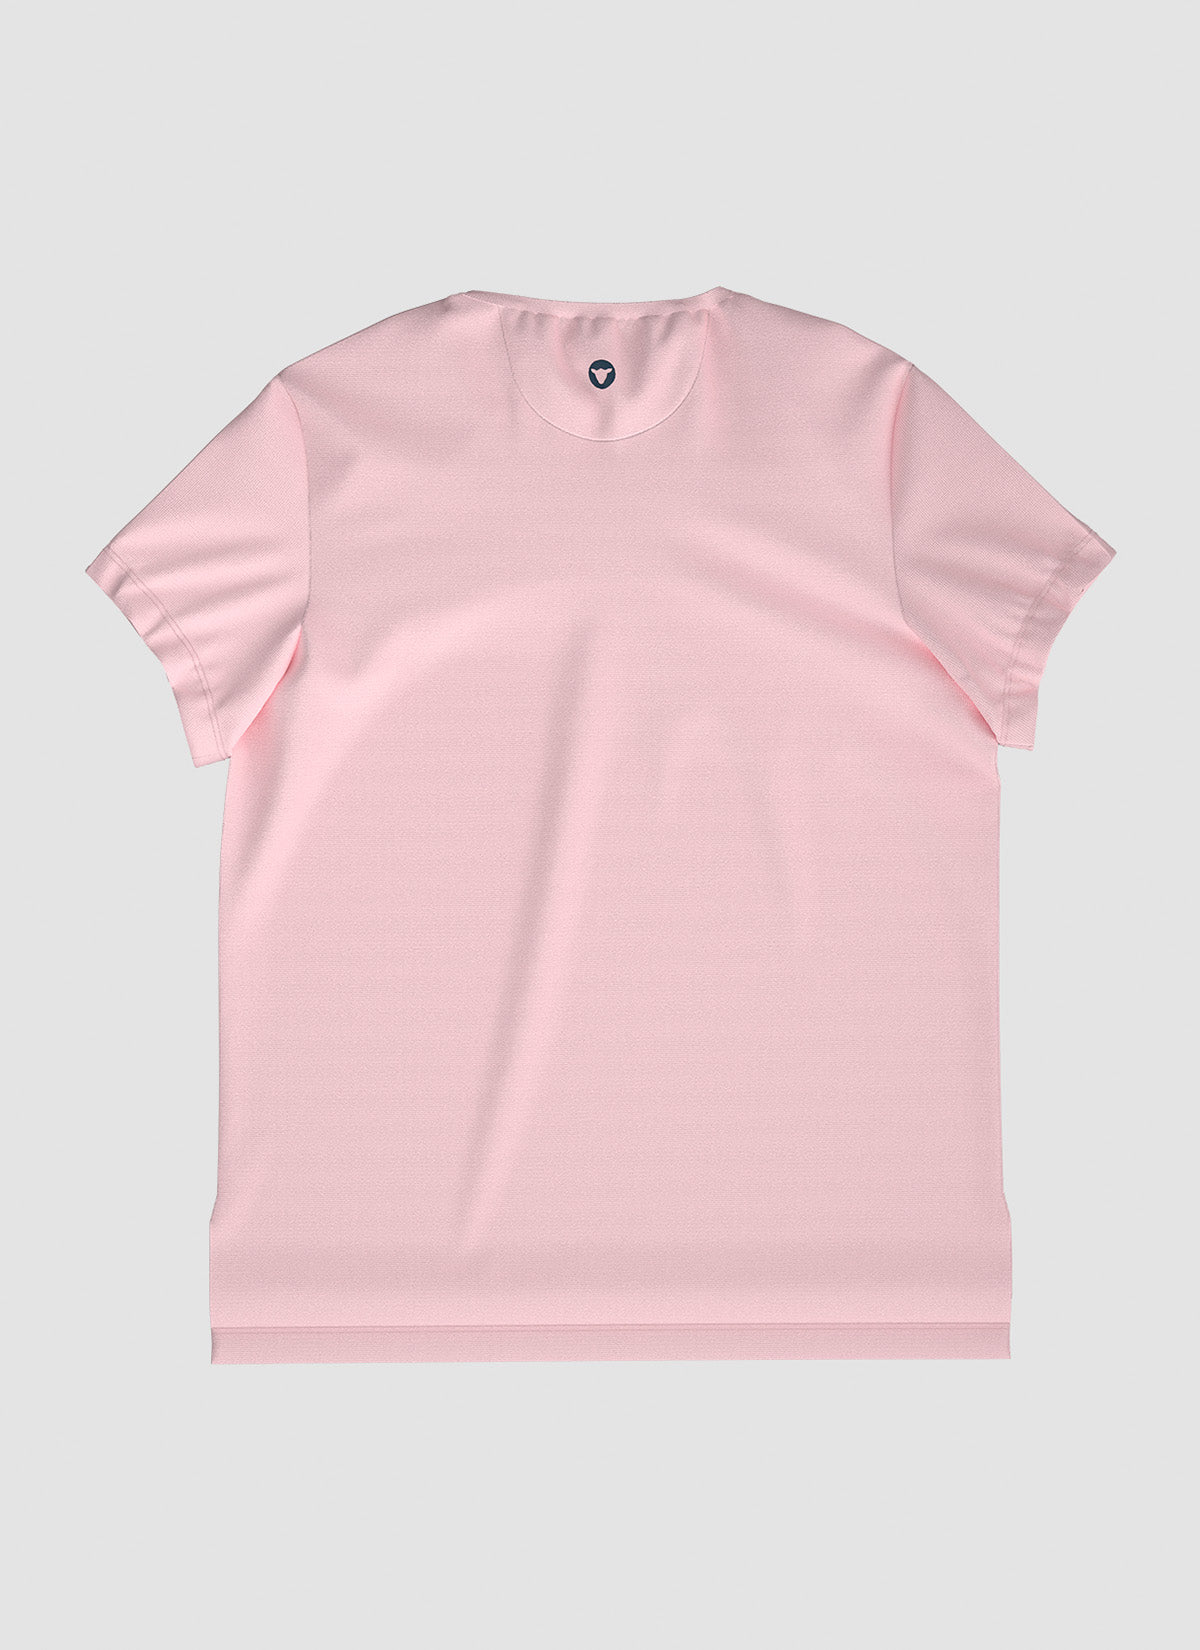 Women's Dry SS Tee - Barely Pink